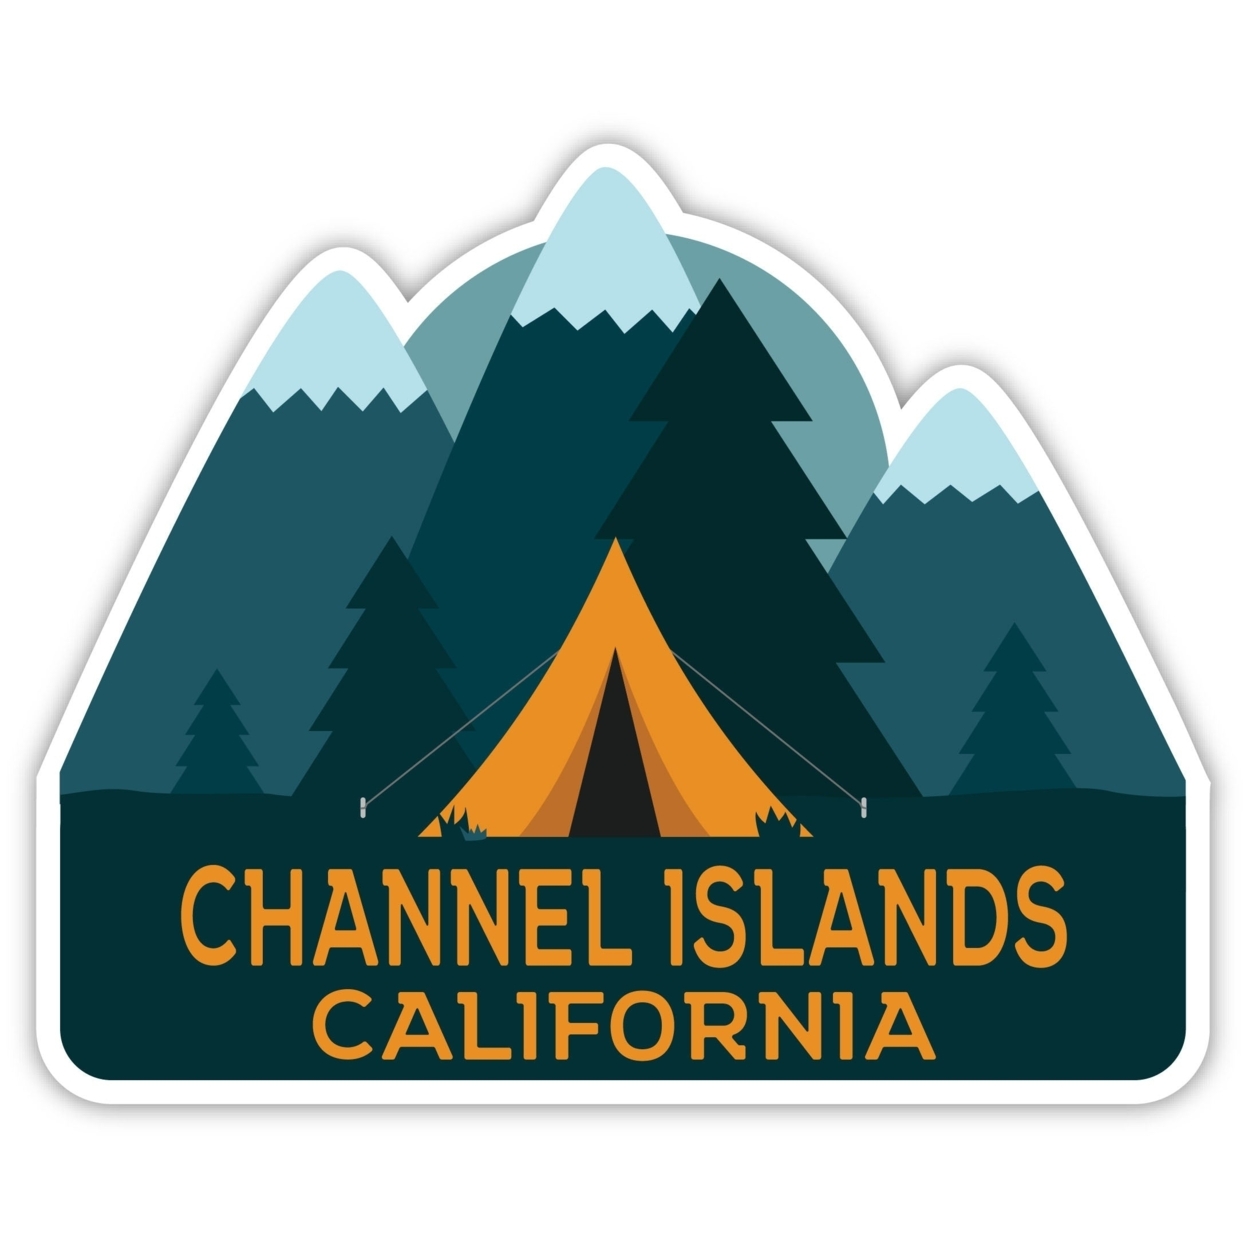 Channel Islands California Souvenir Decorative Stickers (Choose Theme And Size) - 4-Pack, 10-Inch, Tent